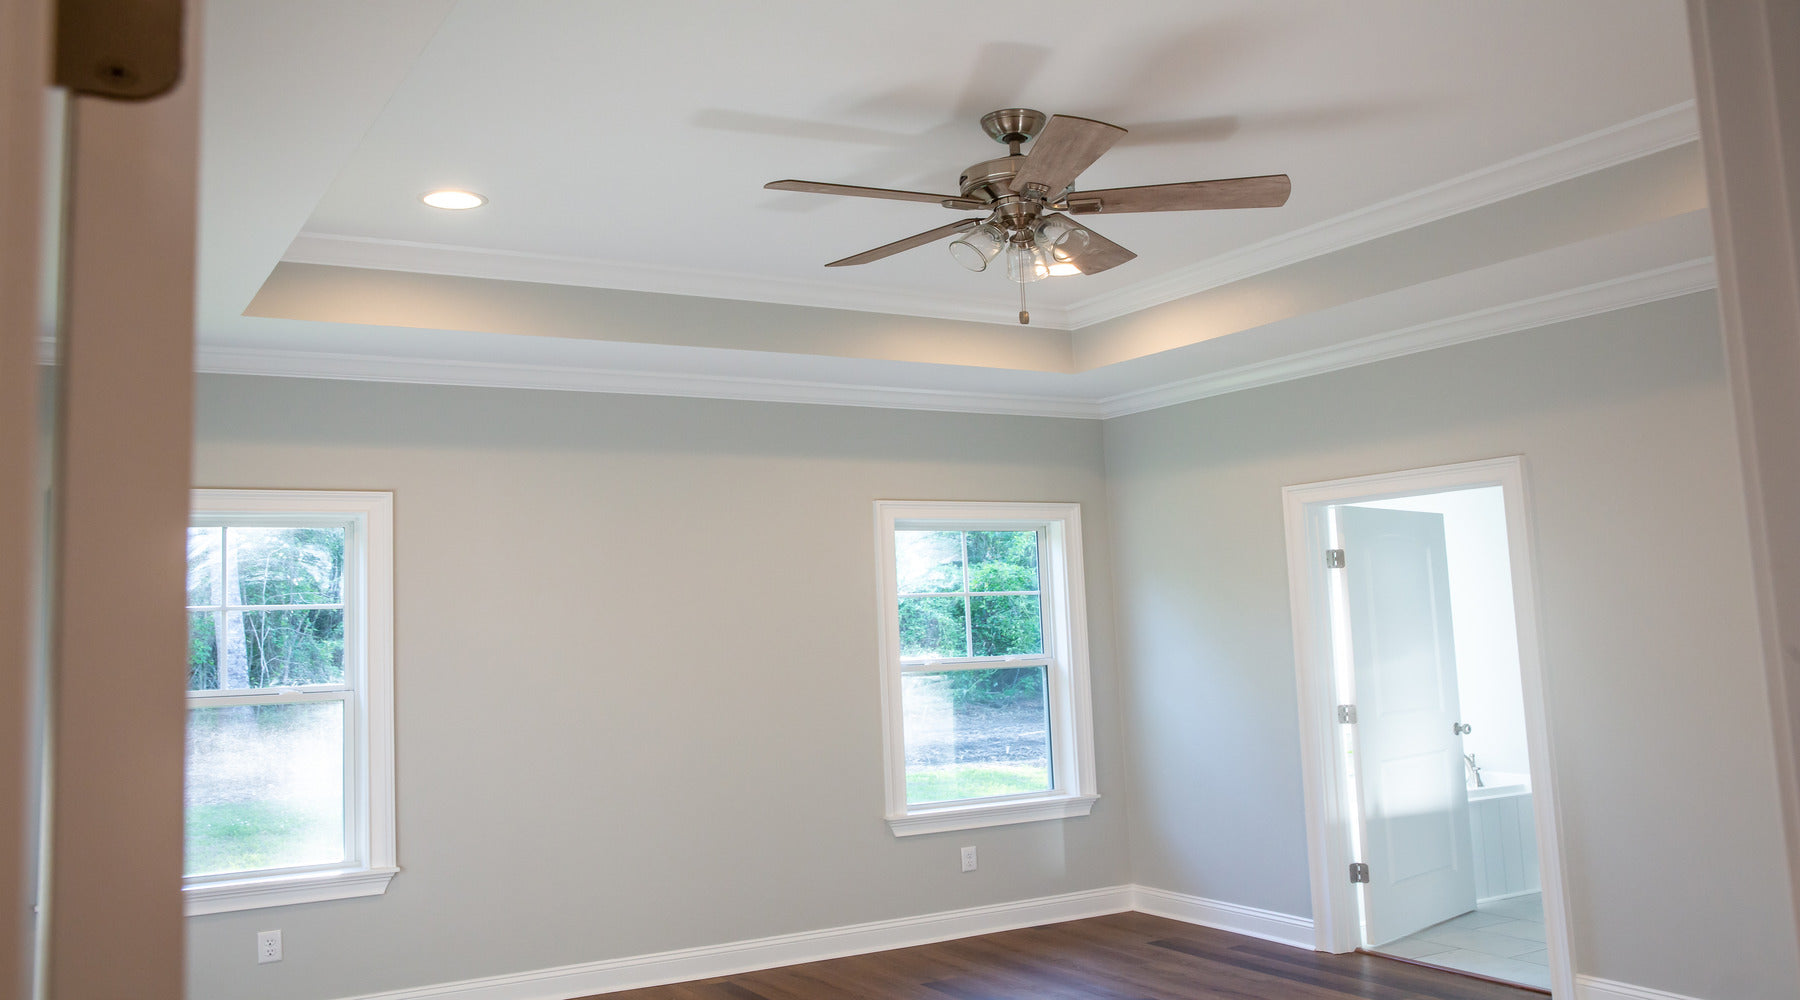 Ceiling fan shown in master bedroom with trey ceiling and hardwood floors